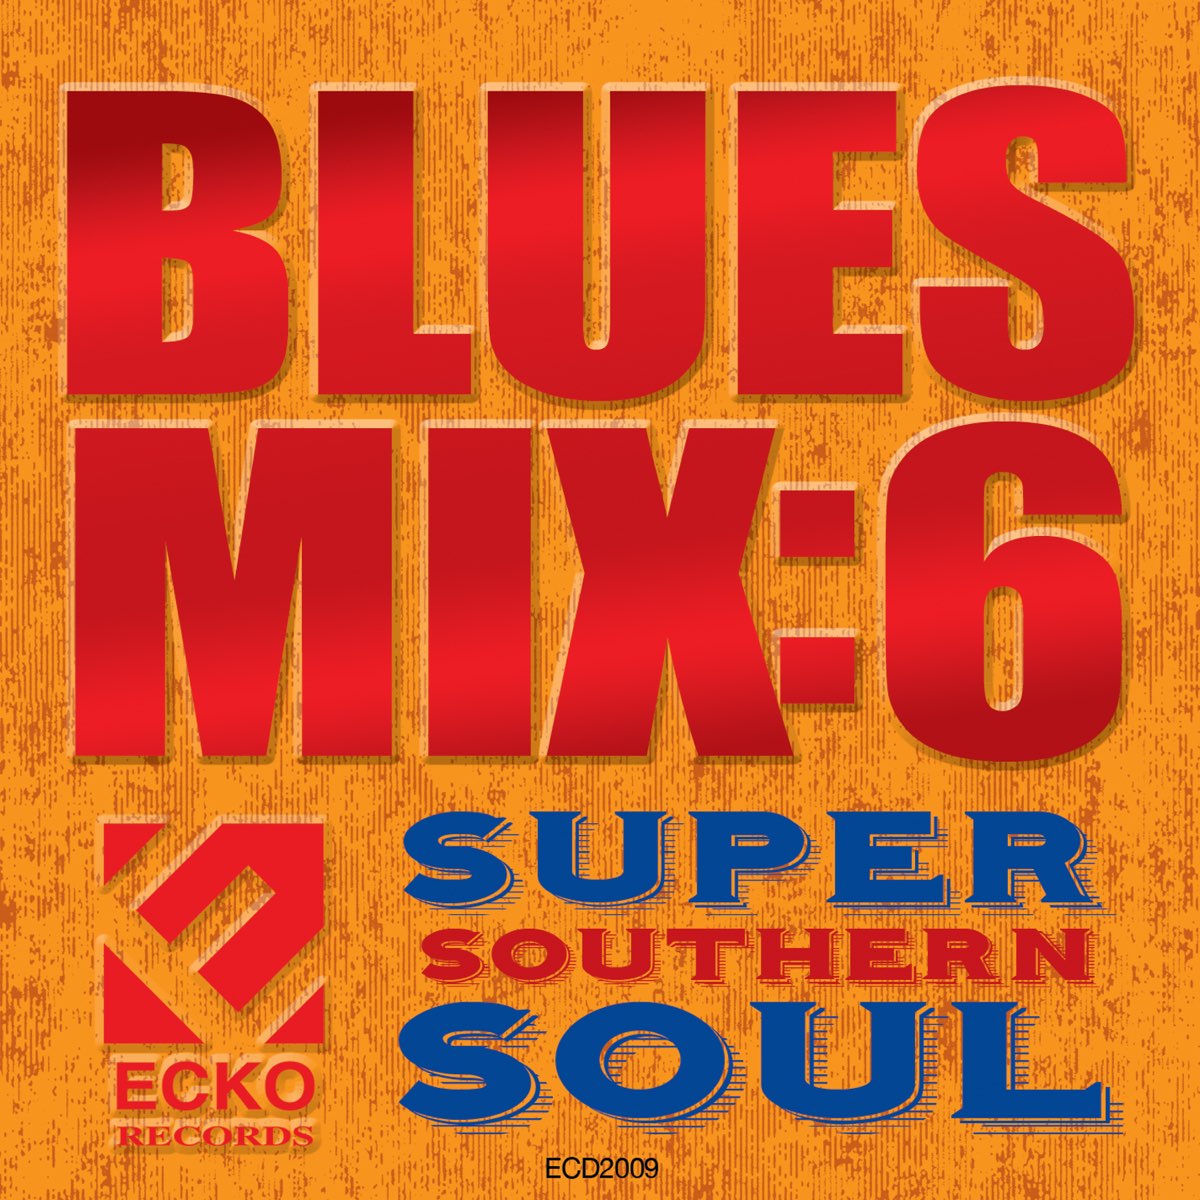 ‎Blues Mix, Vol. 6 Super Southern Soul by Various Artists on Apple Music